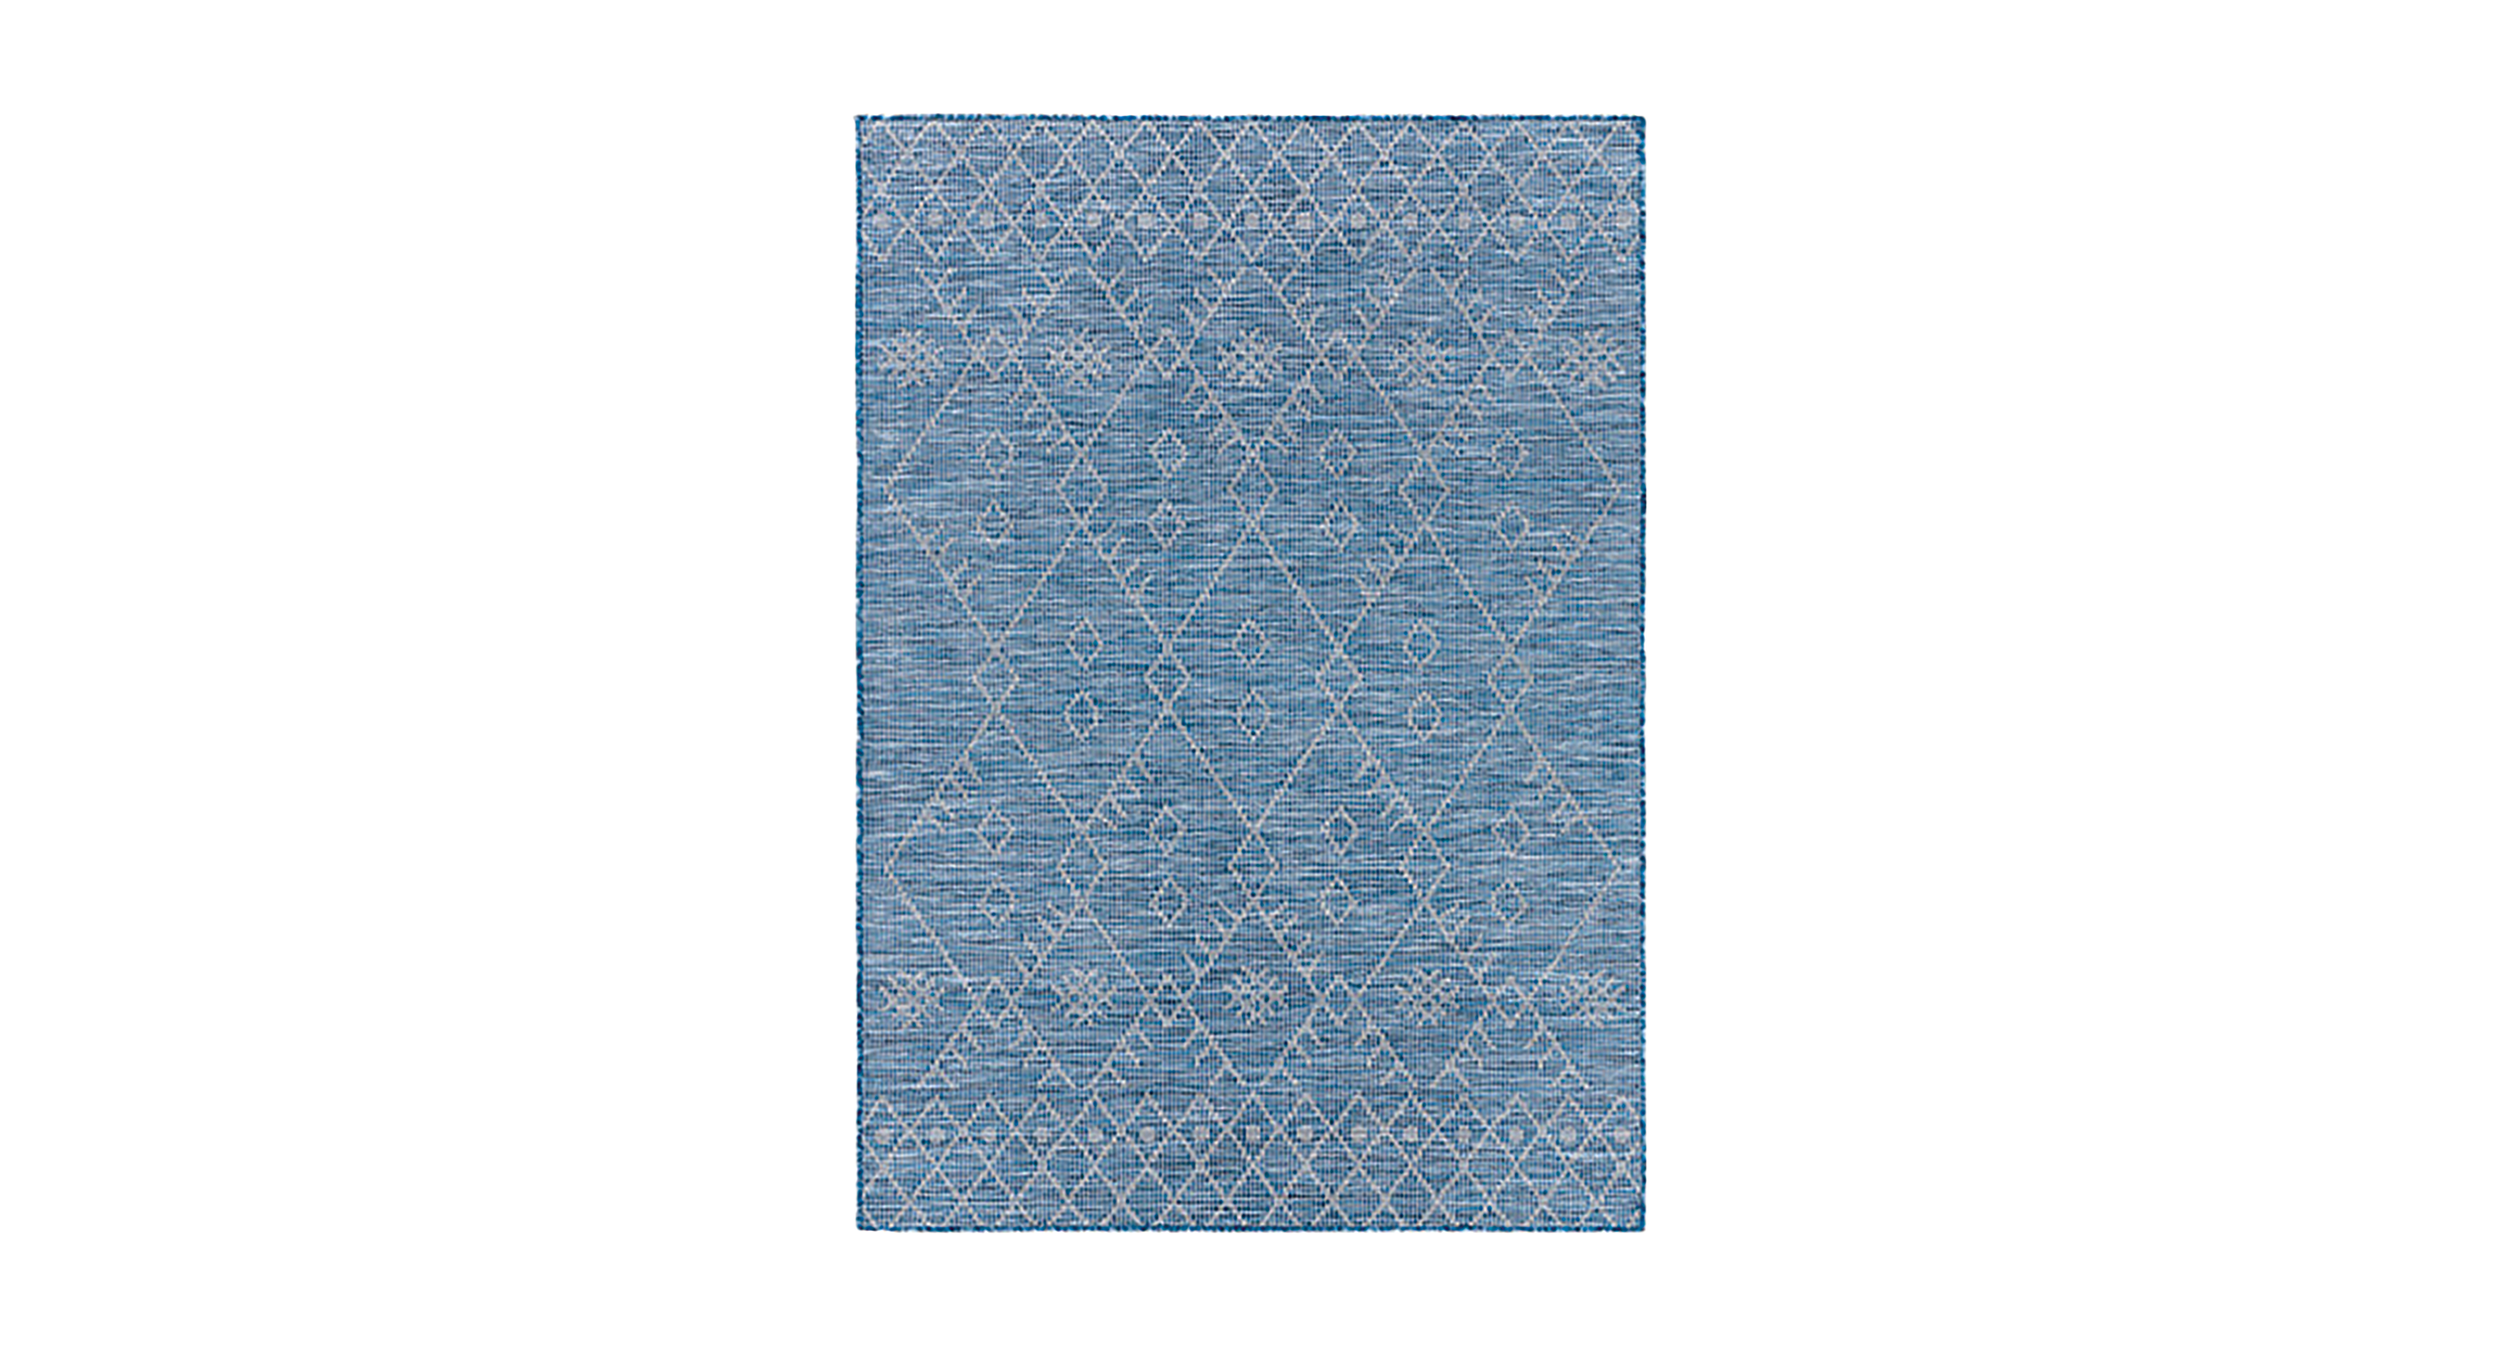  Define your outdoor space and create an extra room with the soft blue tones of the  Pasadena  outdoor rug.   www.Living.ky   